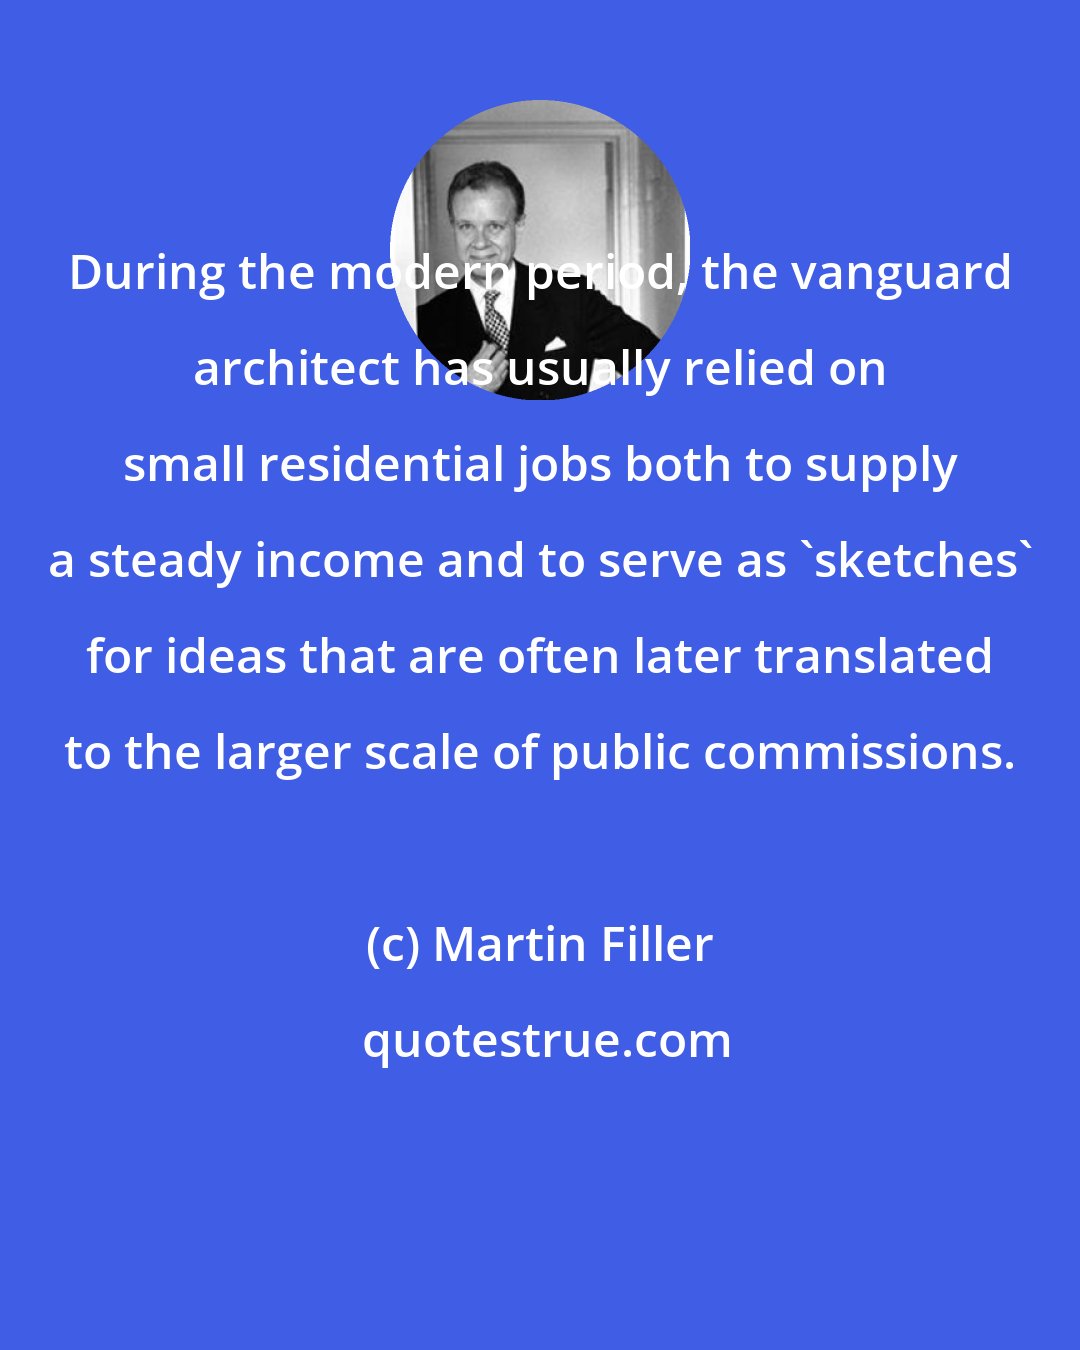 Martin Filler: During the modern period, the vanguard architect has usually relied on small residential jobs both to supply a steady income and to serve as 'sketches' for ideas that are often later translated to the larger scale of public commissions.